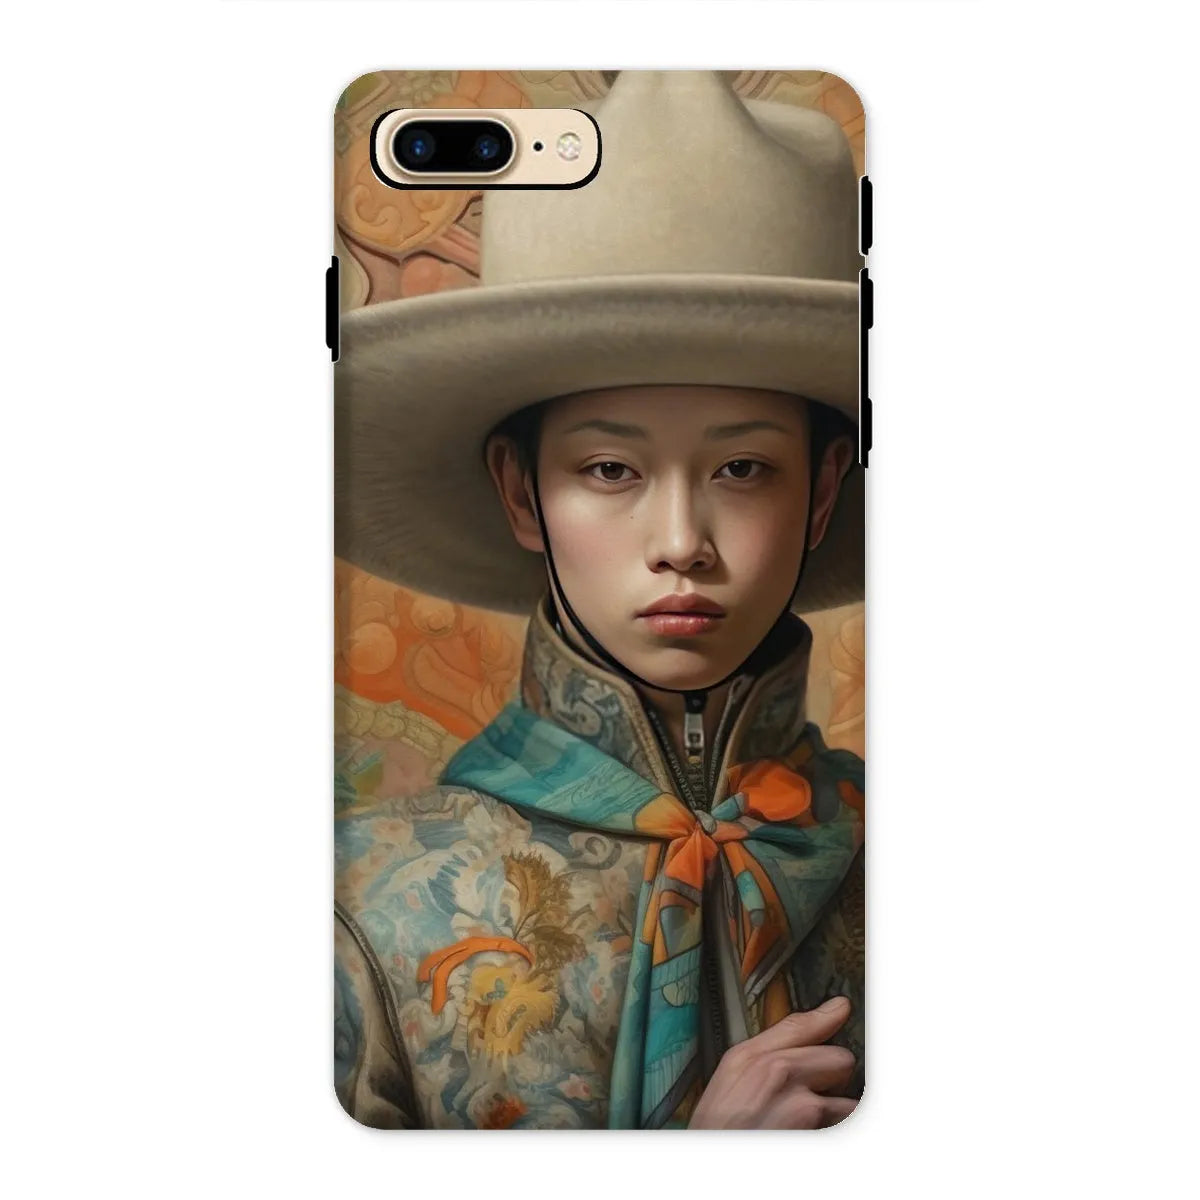 Xiang - Gaysian Chinese Cowboy Aesthetic Art Phone Case - Iphone 8 Plus / Matte - Mobile Phone Cases - Aesthetic Art